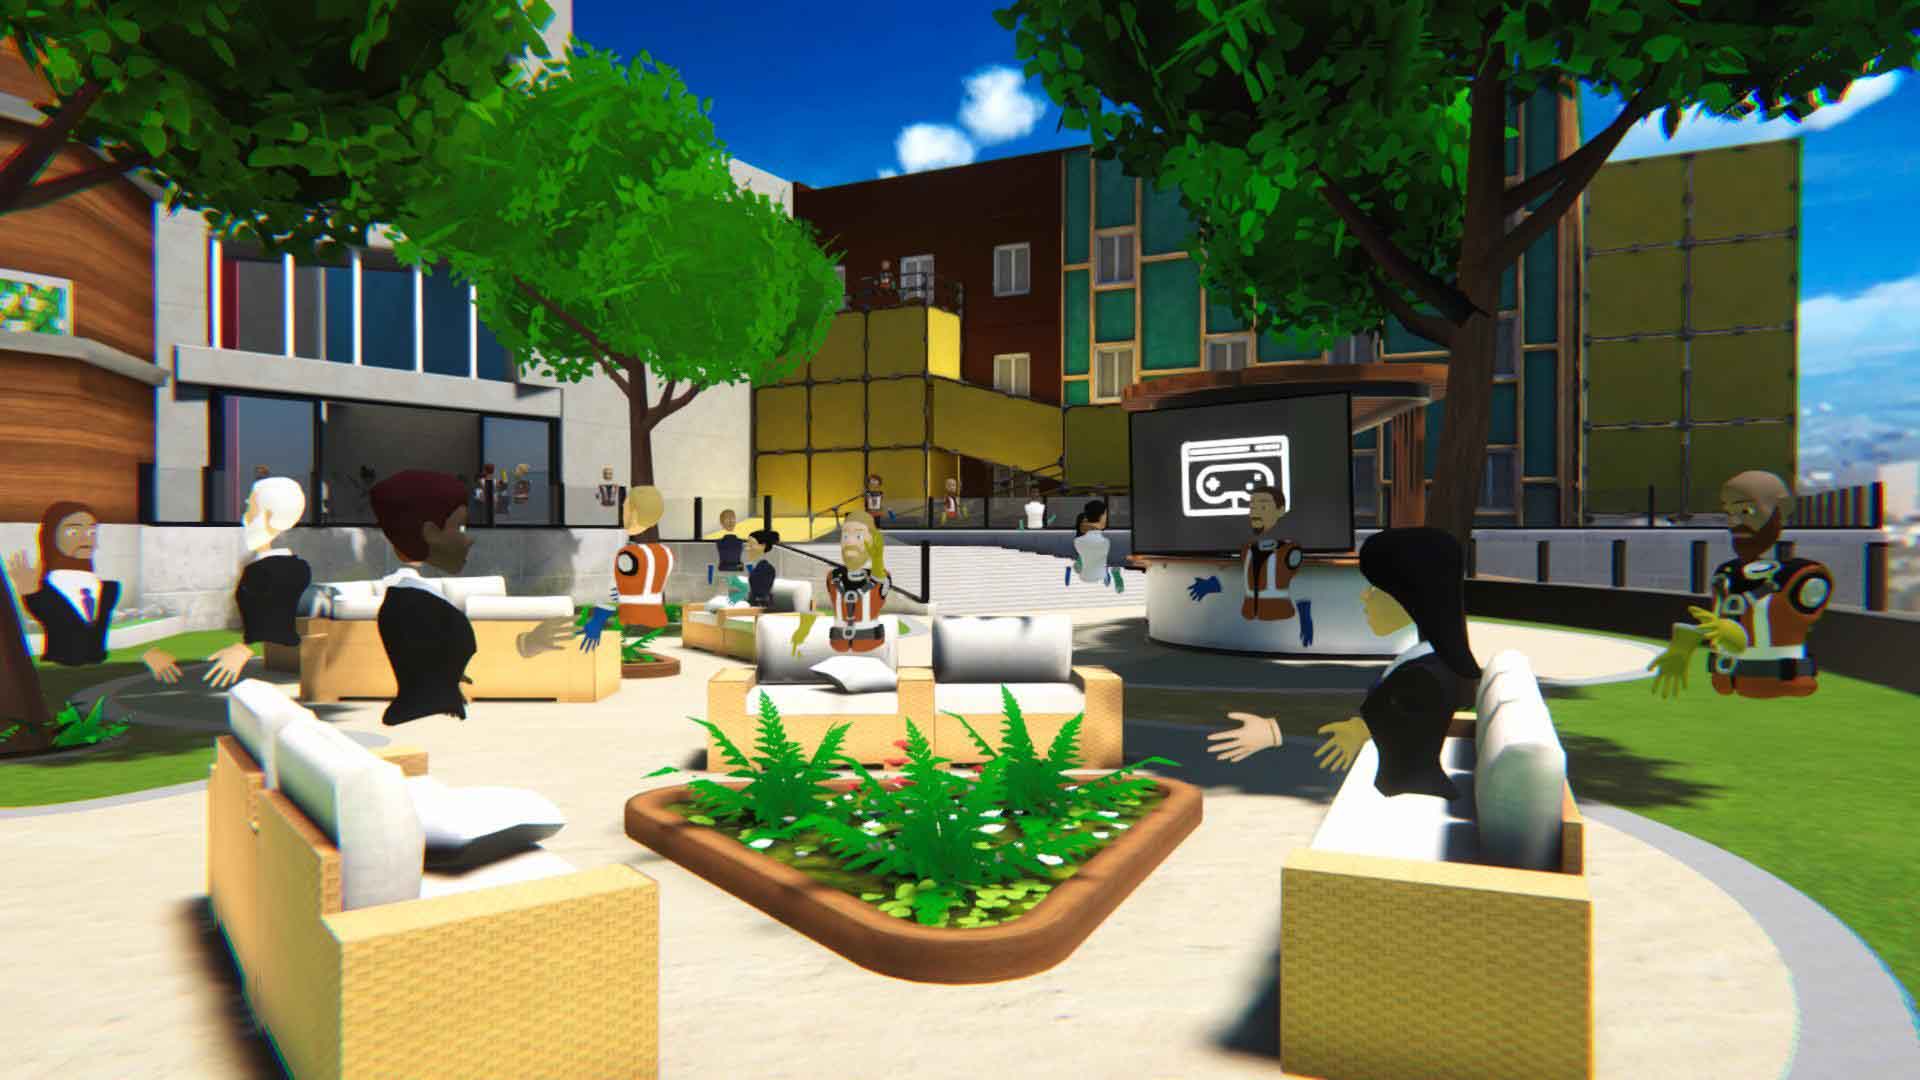 Visual from outside the virtual campus